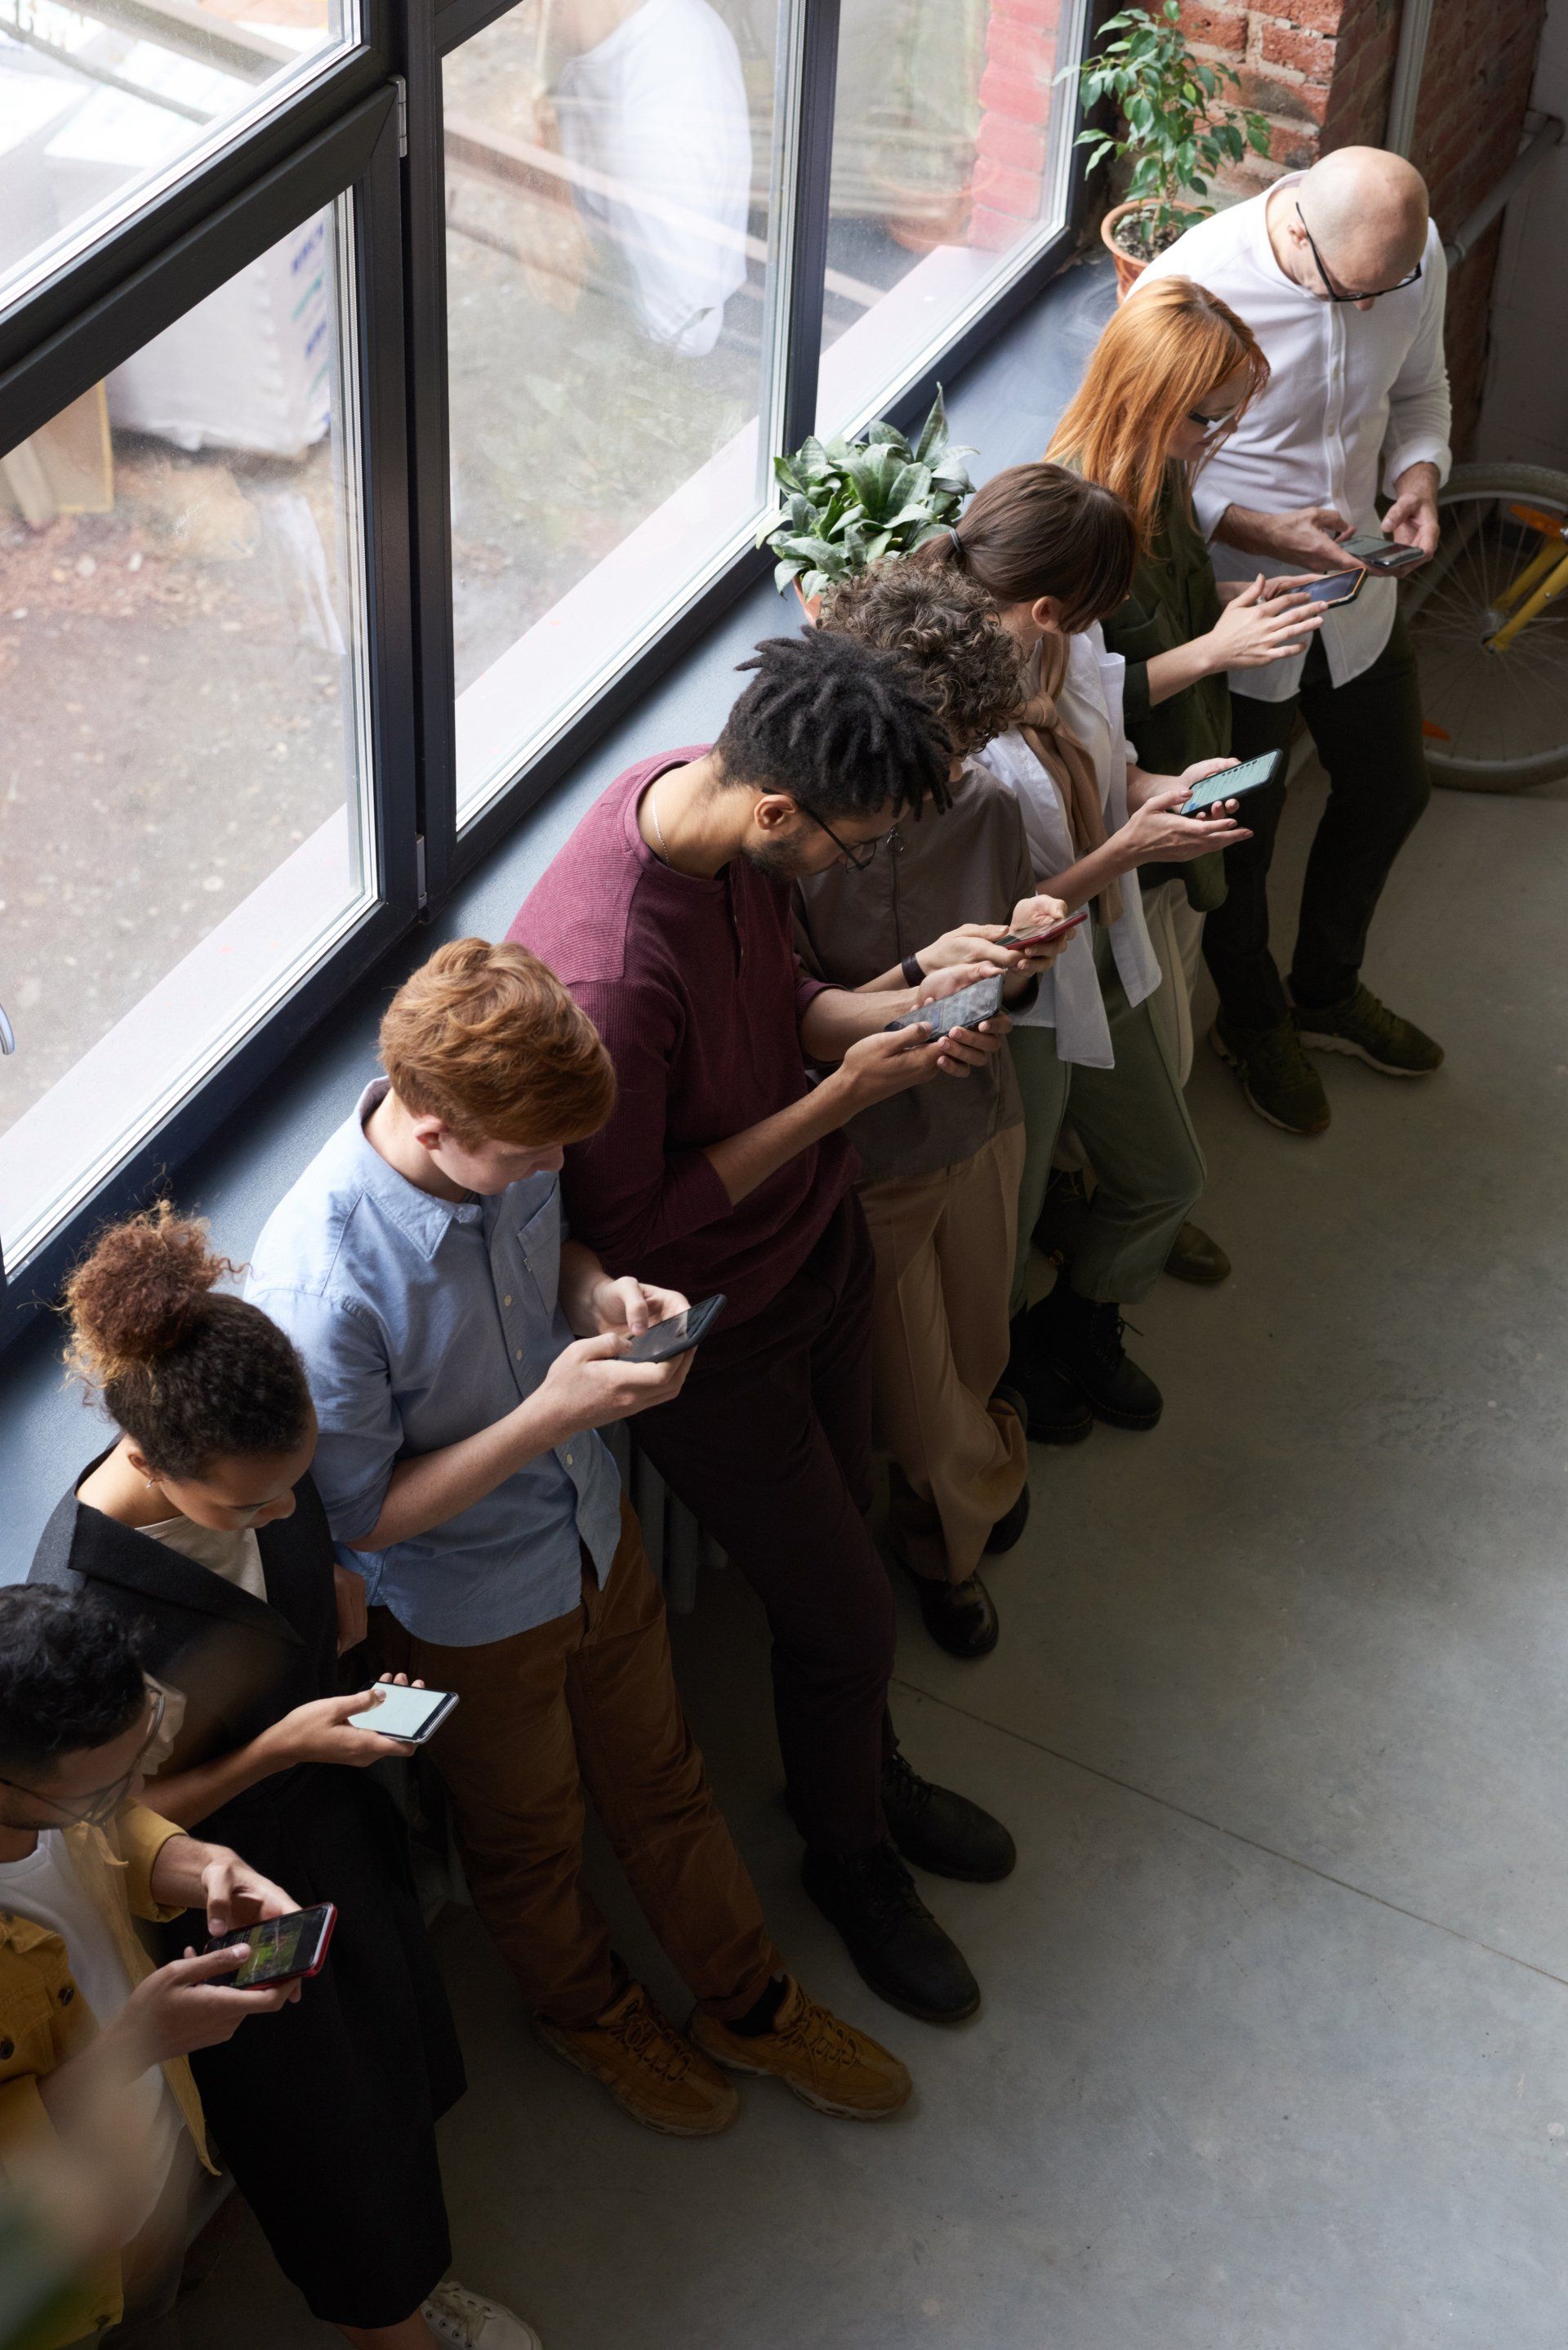 Image showing a row of people standing against a window all on their mobile phones